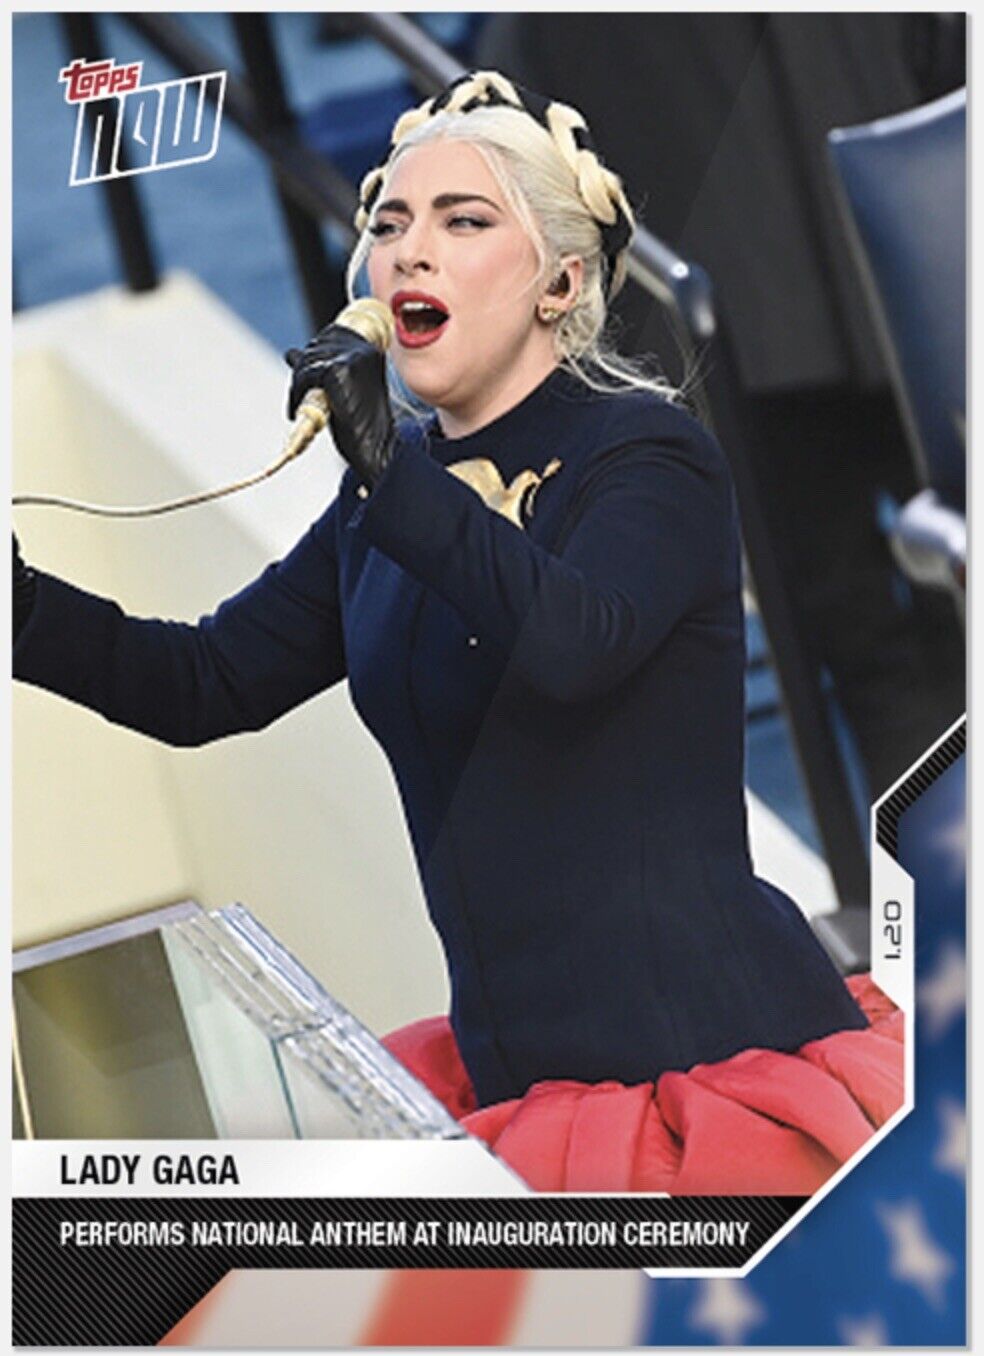 2020 Topps Now Election #17 Lady Gaga Rookie Card National Anthem Inauguration